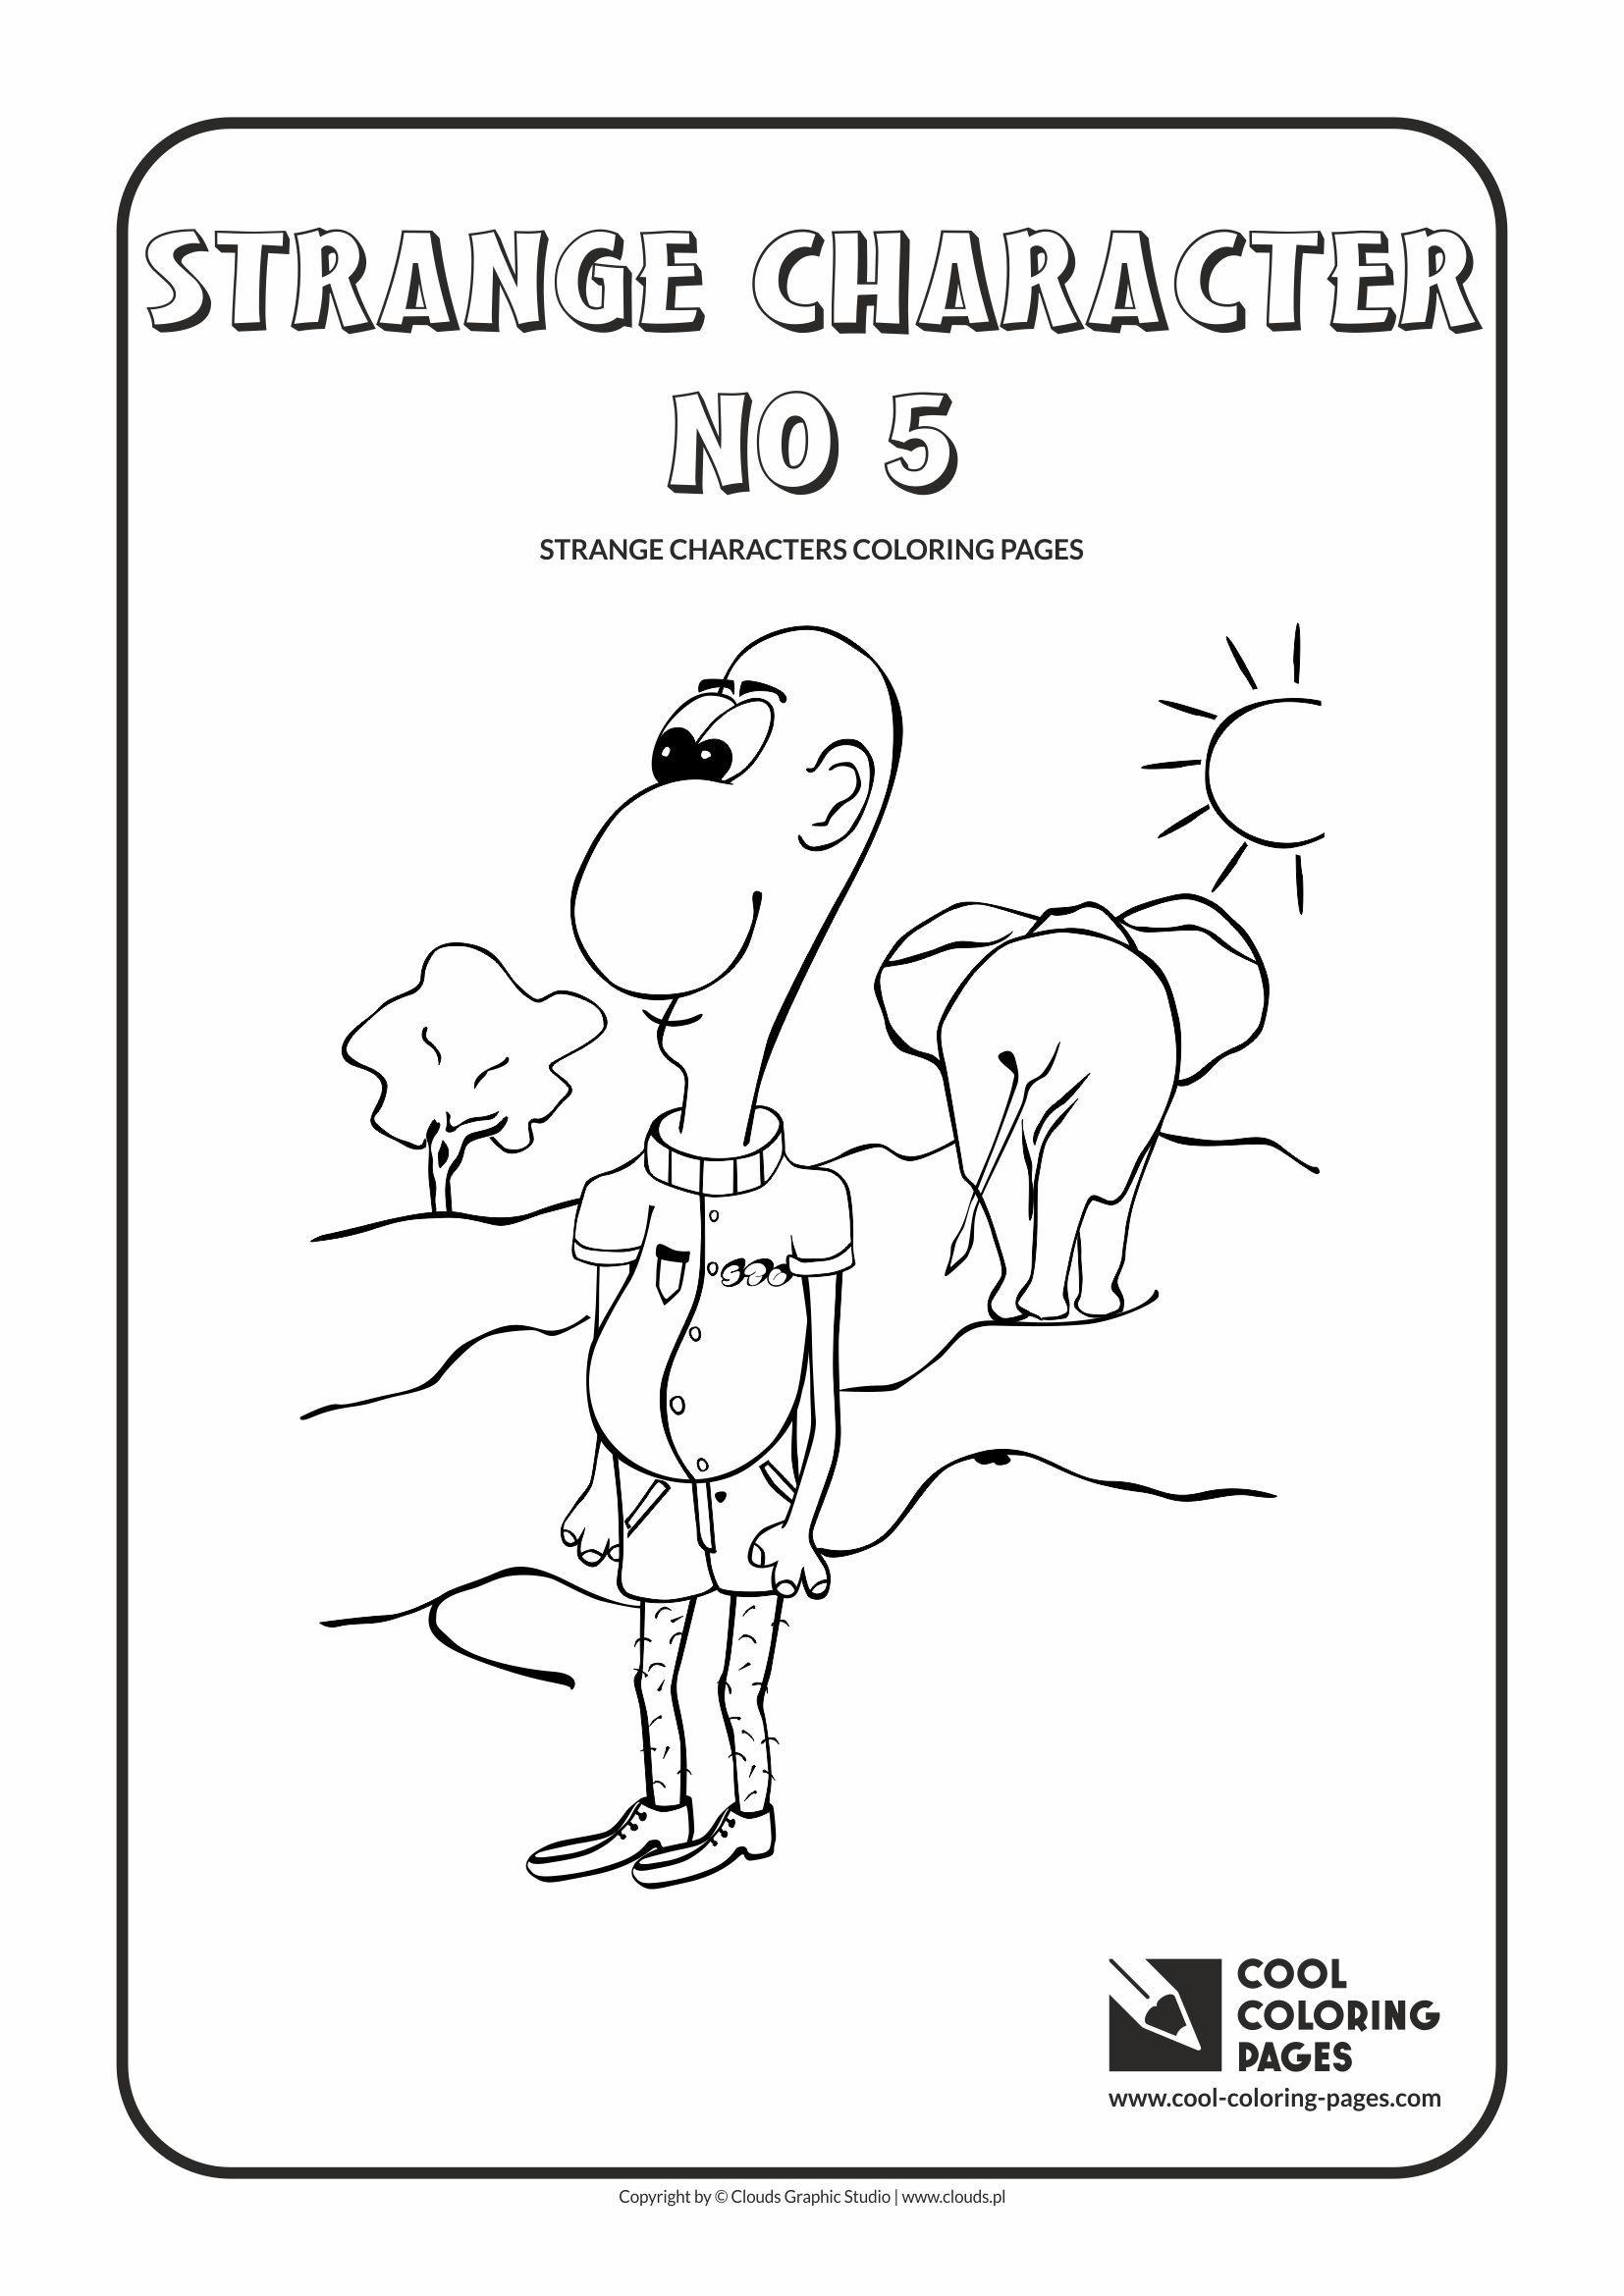 Cool Coloring Pages - Others / Strange character no 5 / Coloring page with strange character no 5